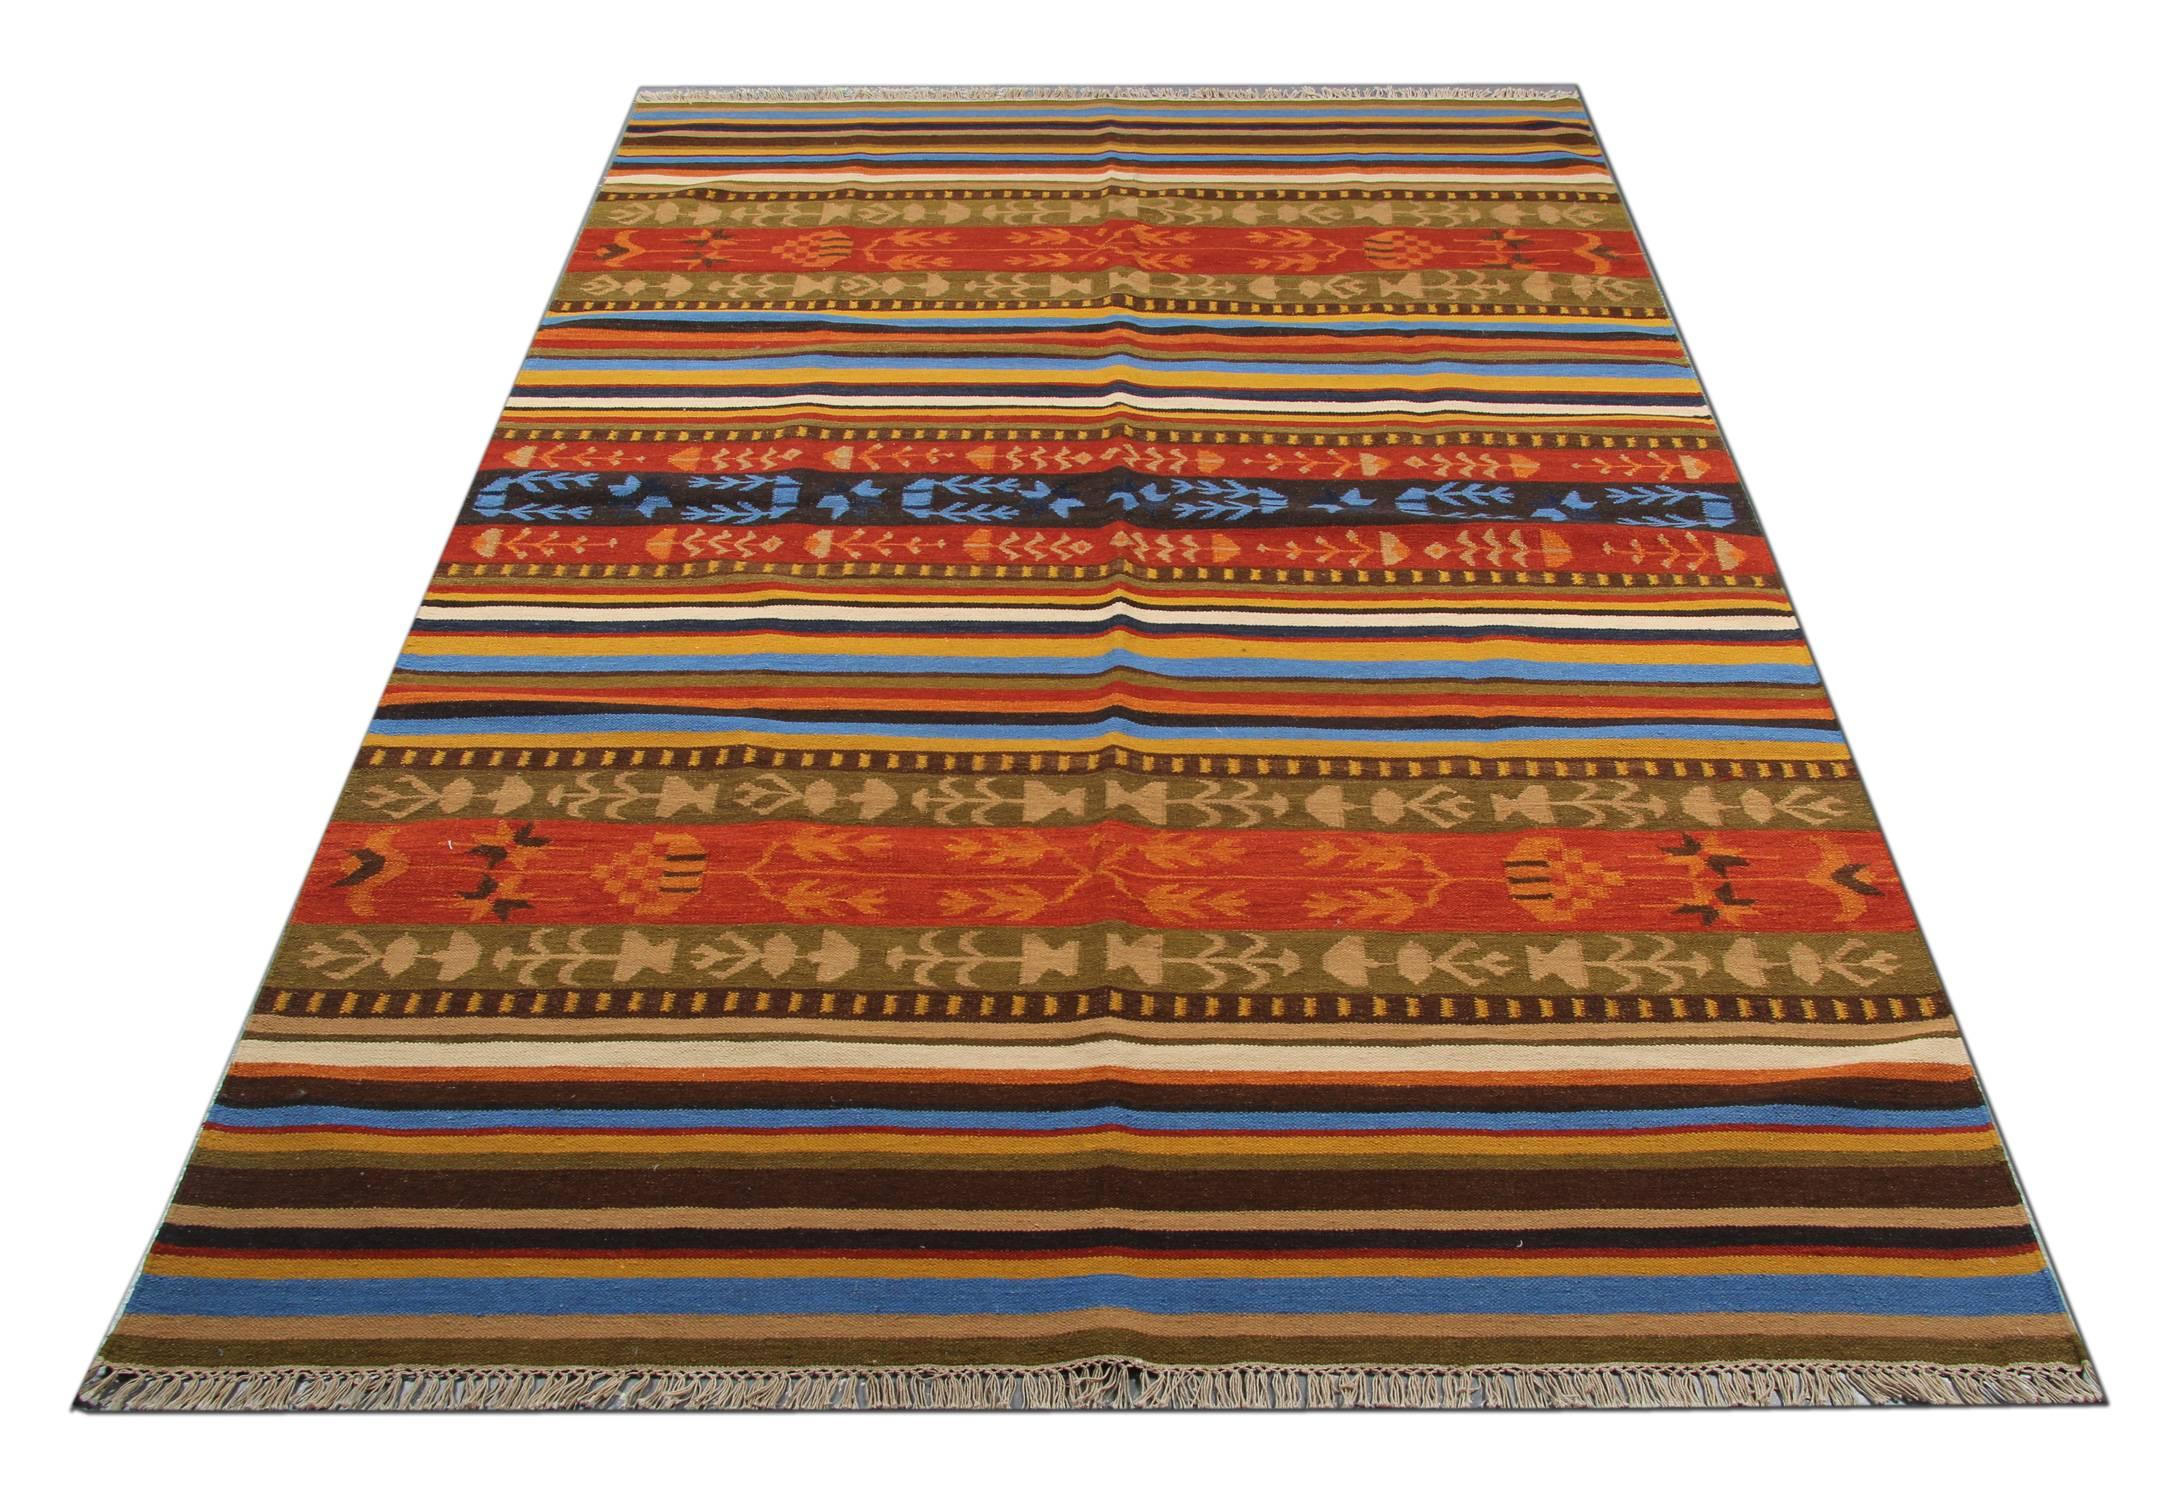 This beautiful wool area rug has been woven by hand and features a fantastic stripe geometric design. Woven in accents of brown, blue, green, beige and rust. Symmetrically woven with sophistication this piece is sure to uplift any room it is